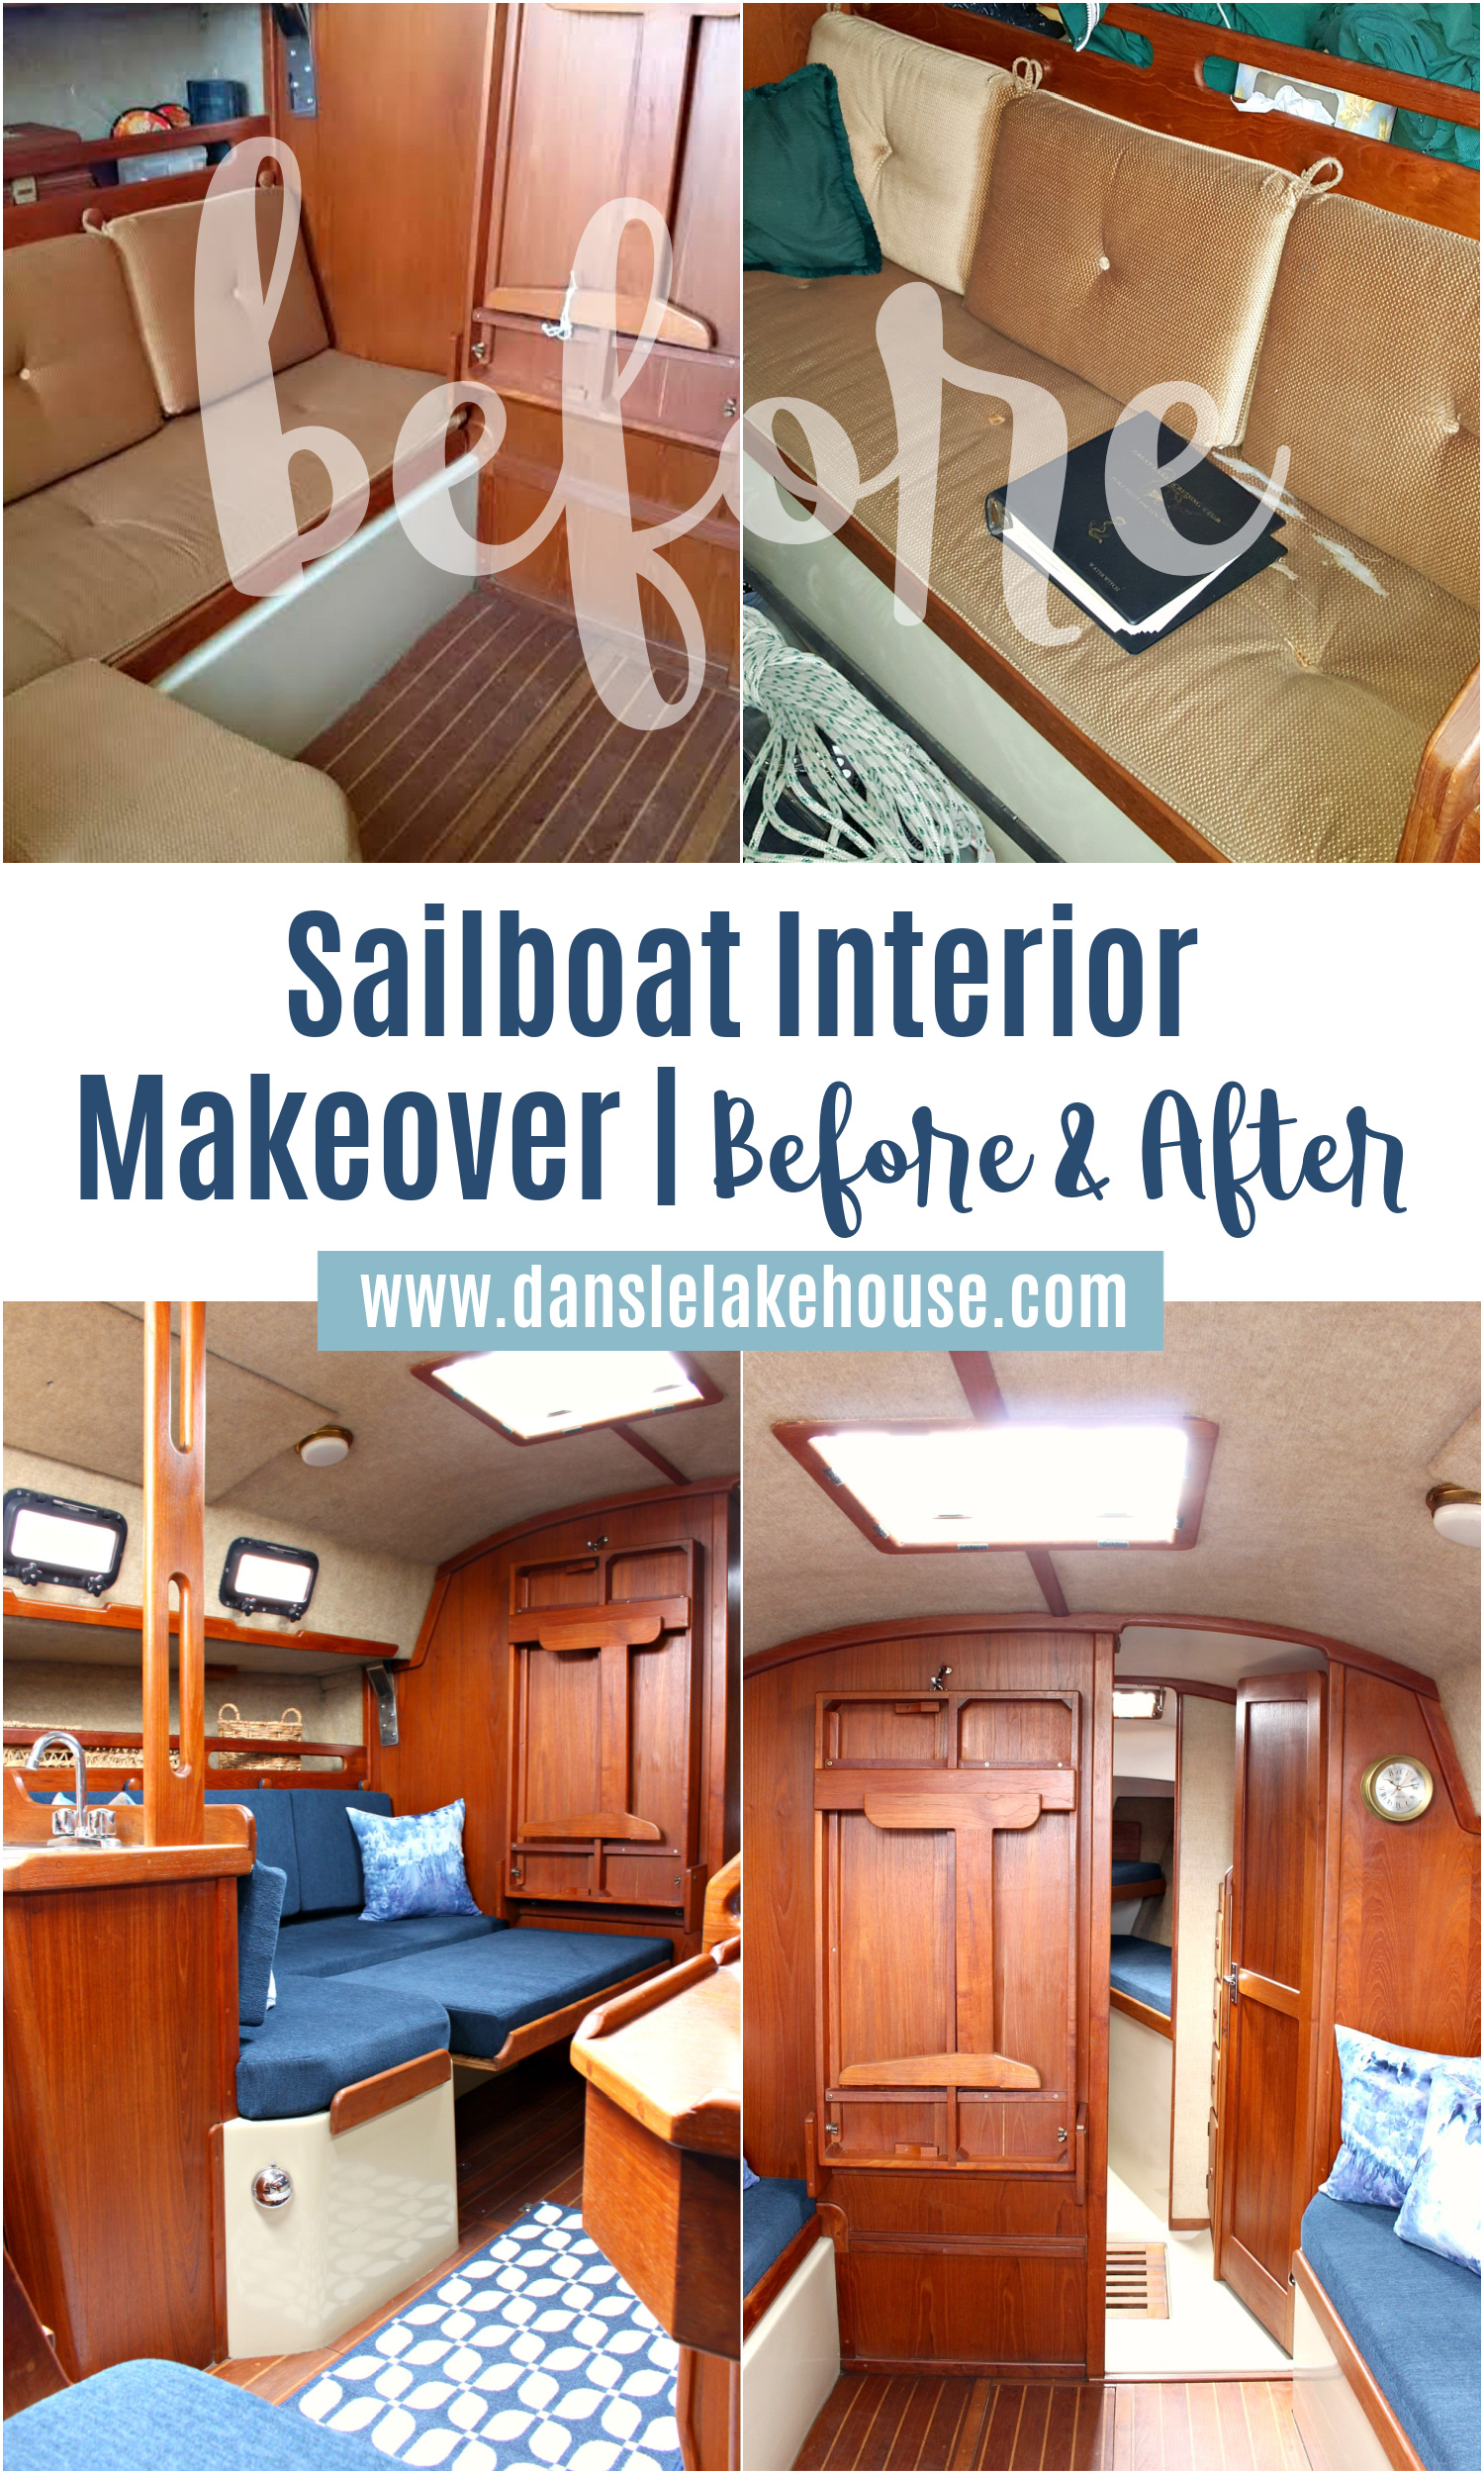 sailboat interior makeover before & after